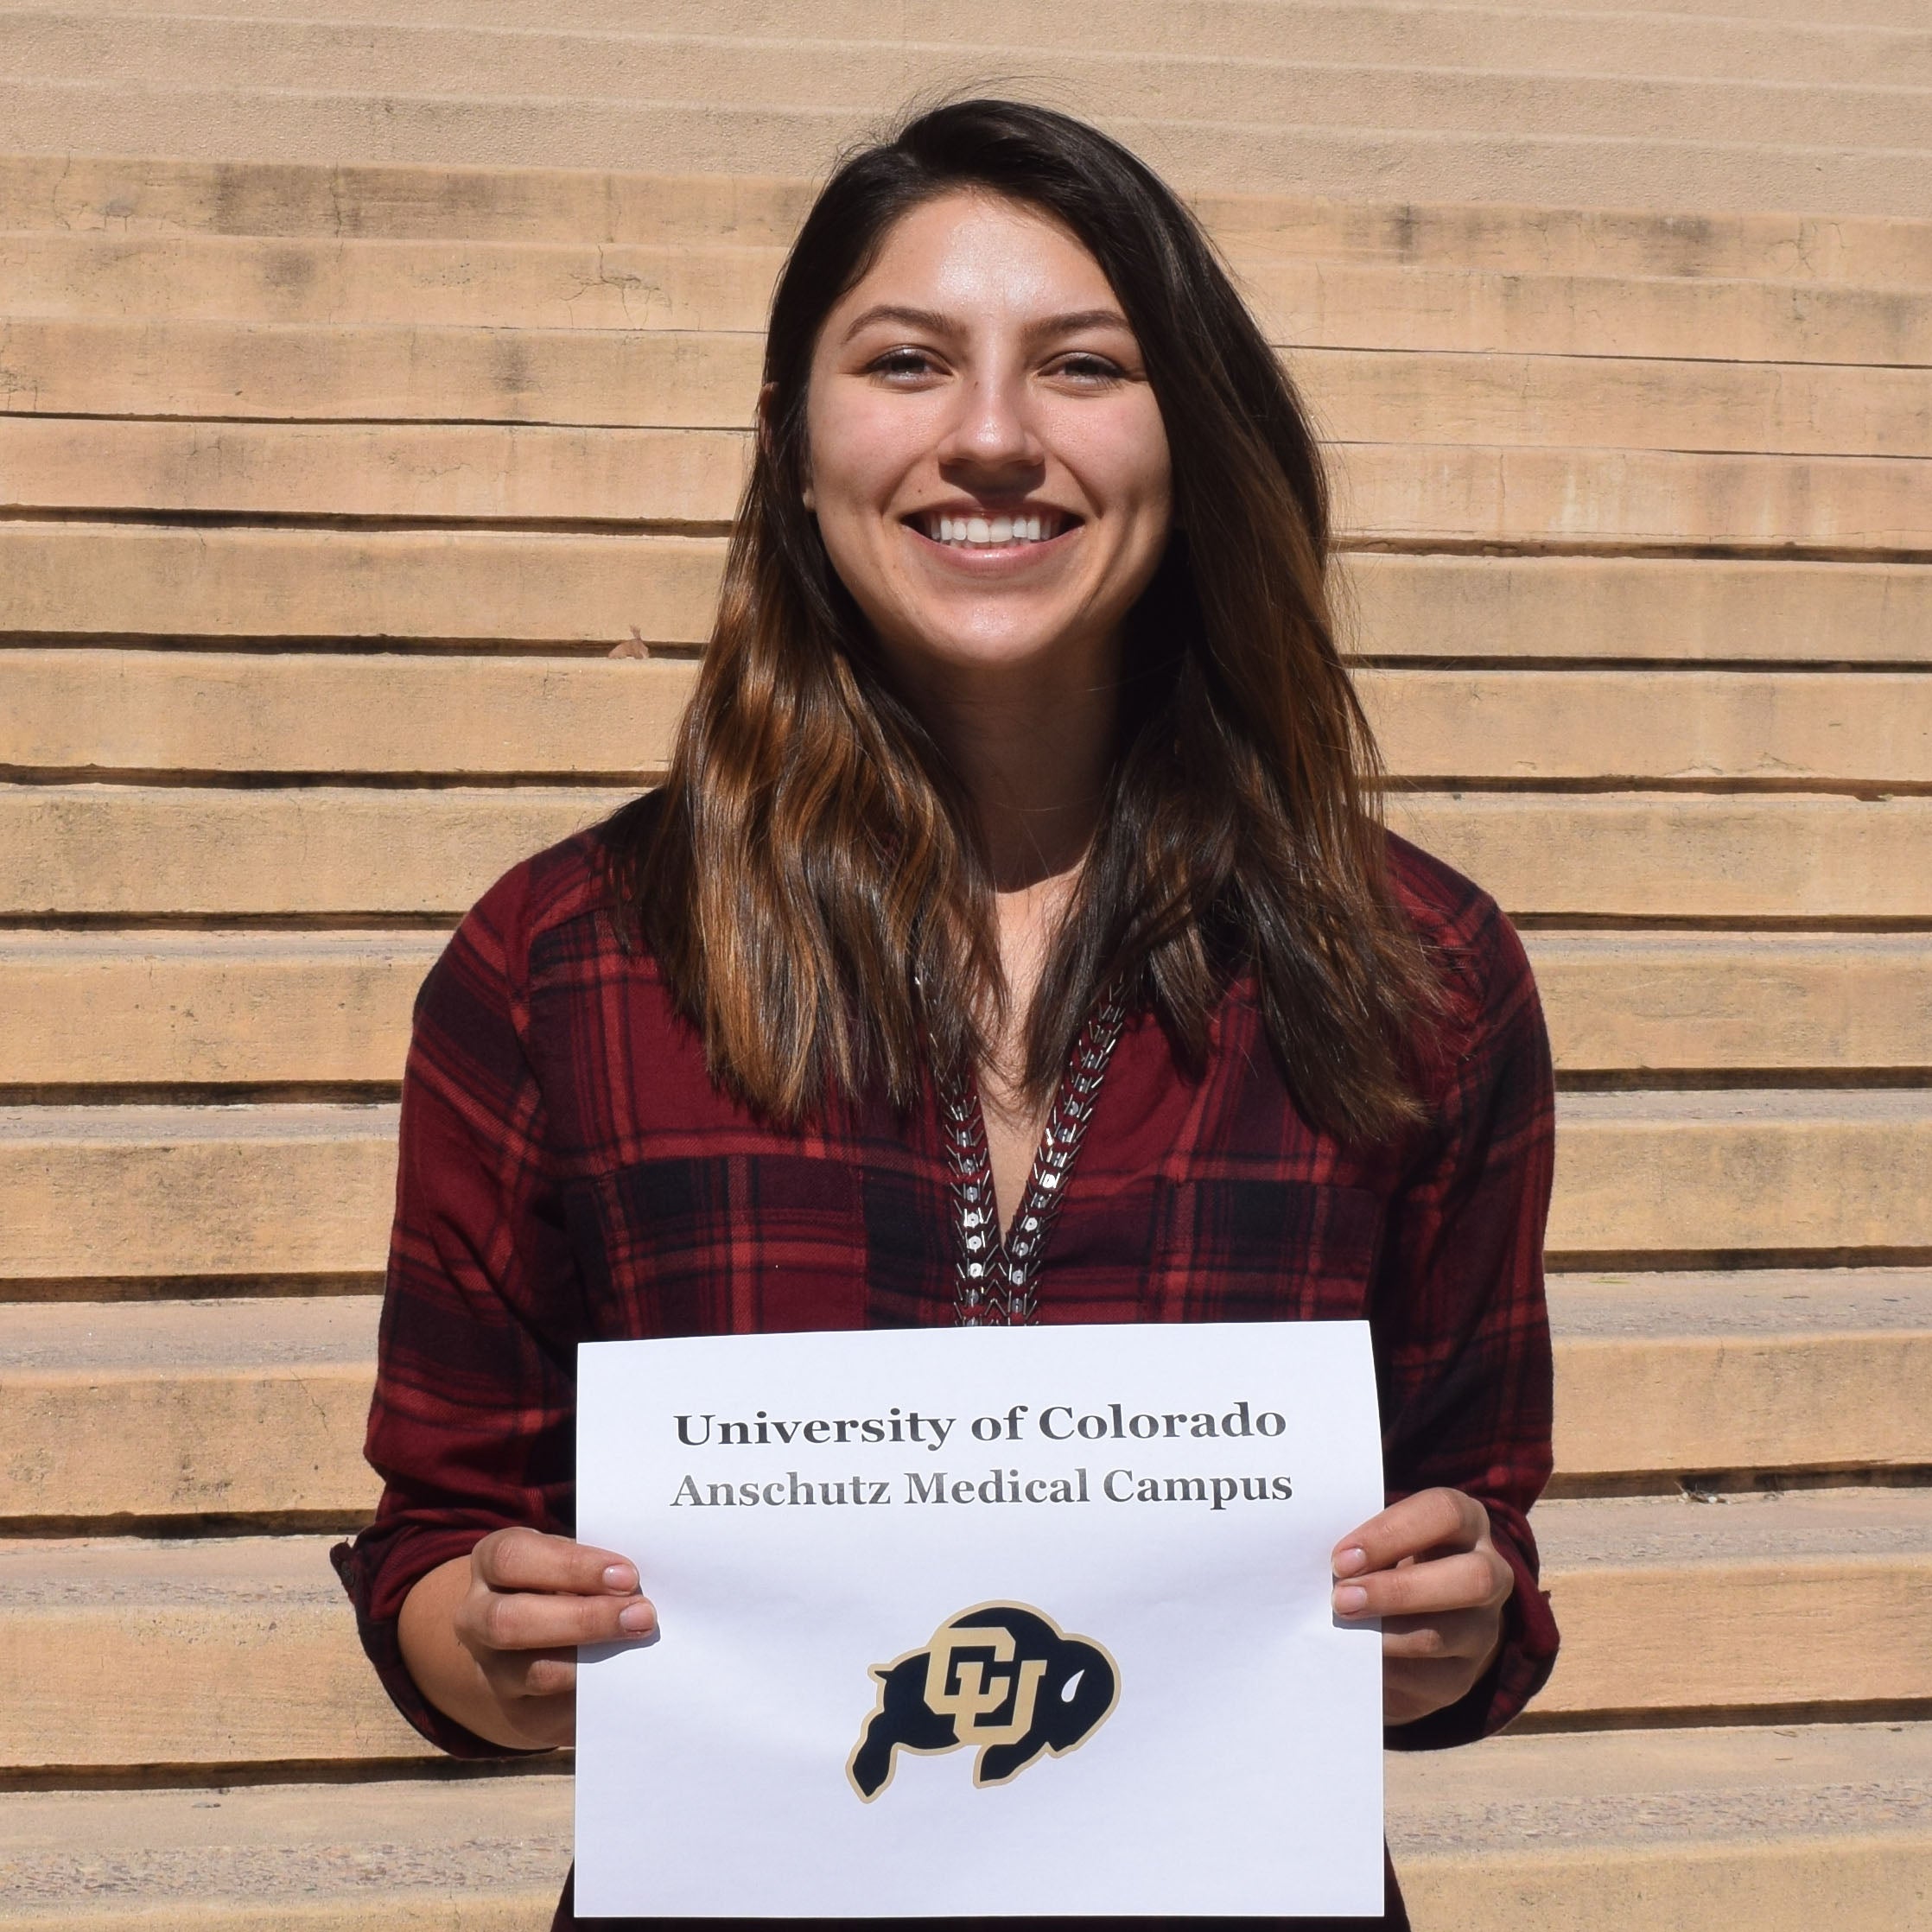 Ashley holds sign showing her graduate school choice the University of Colorado, Denver